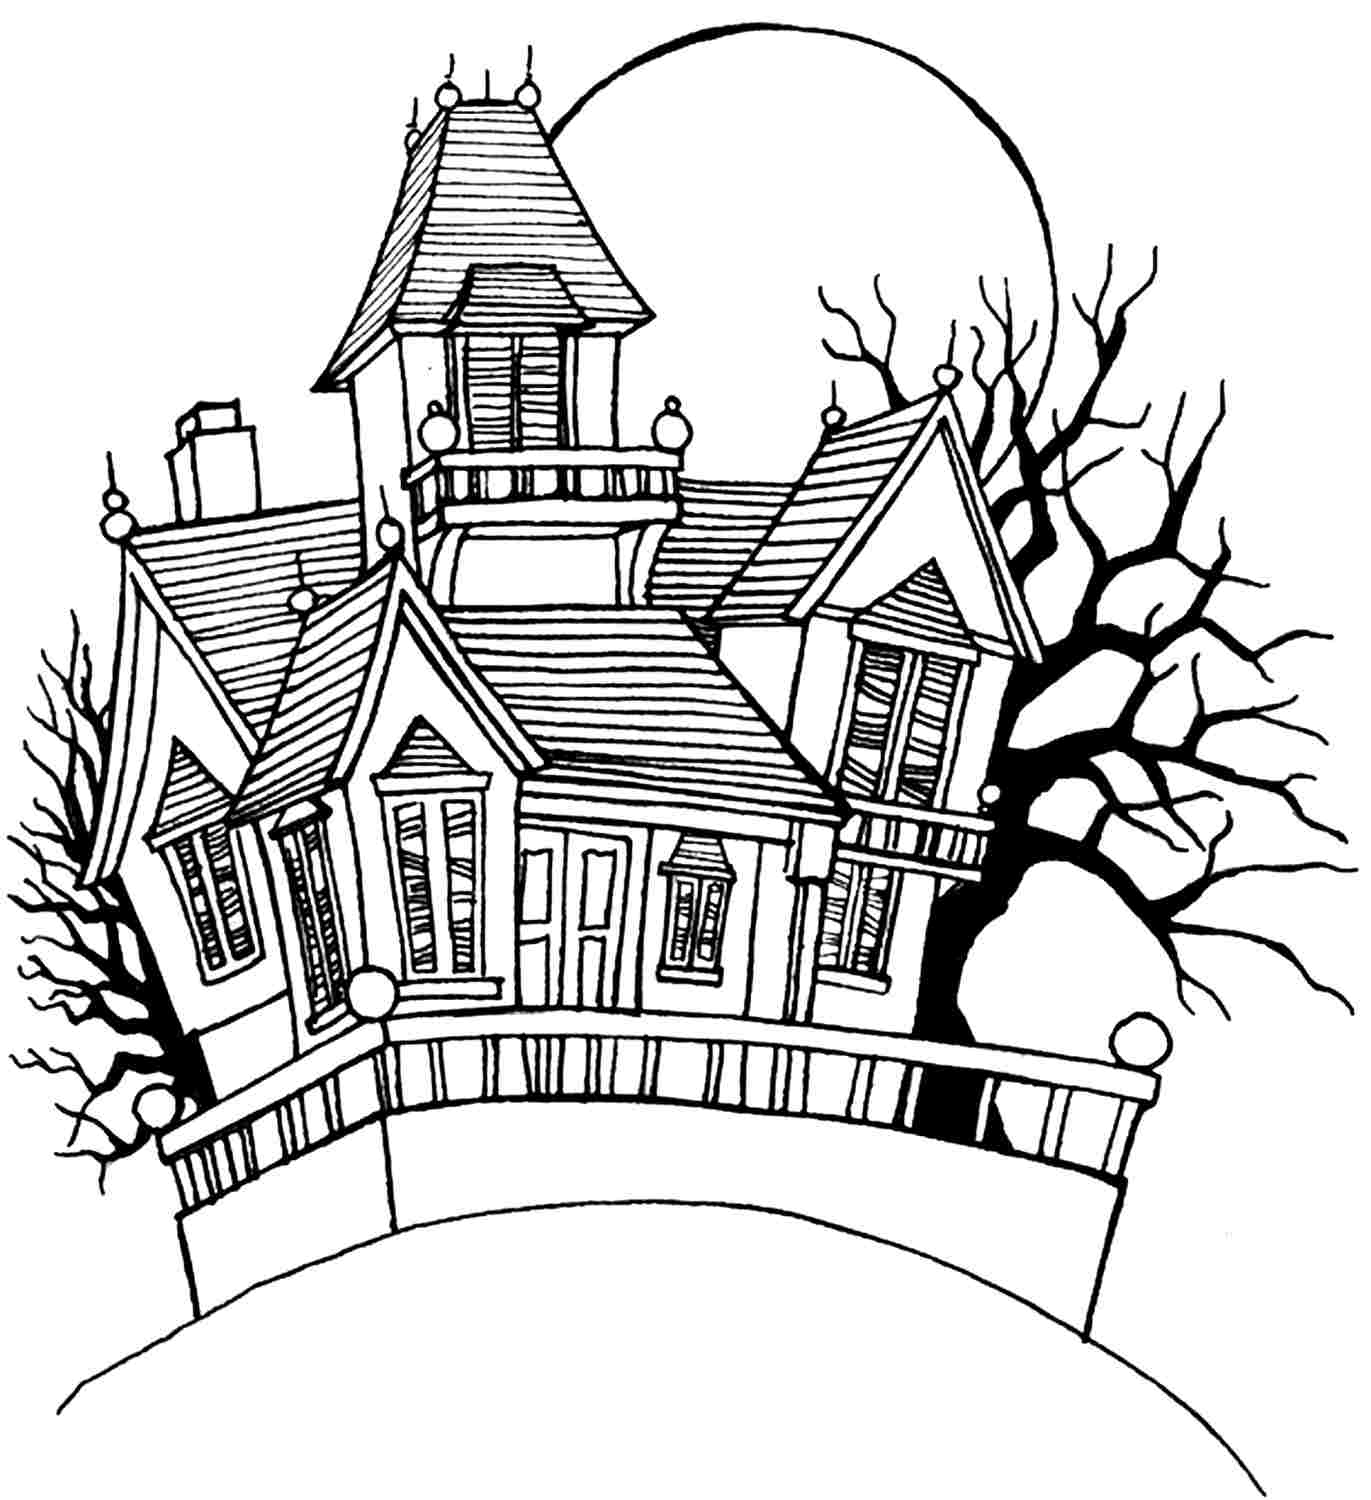 Haunted House Printable Coloring Pages Coloring Pages Haunted House Coloring Book Page Alzenfieldwalk Org